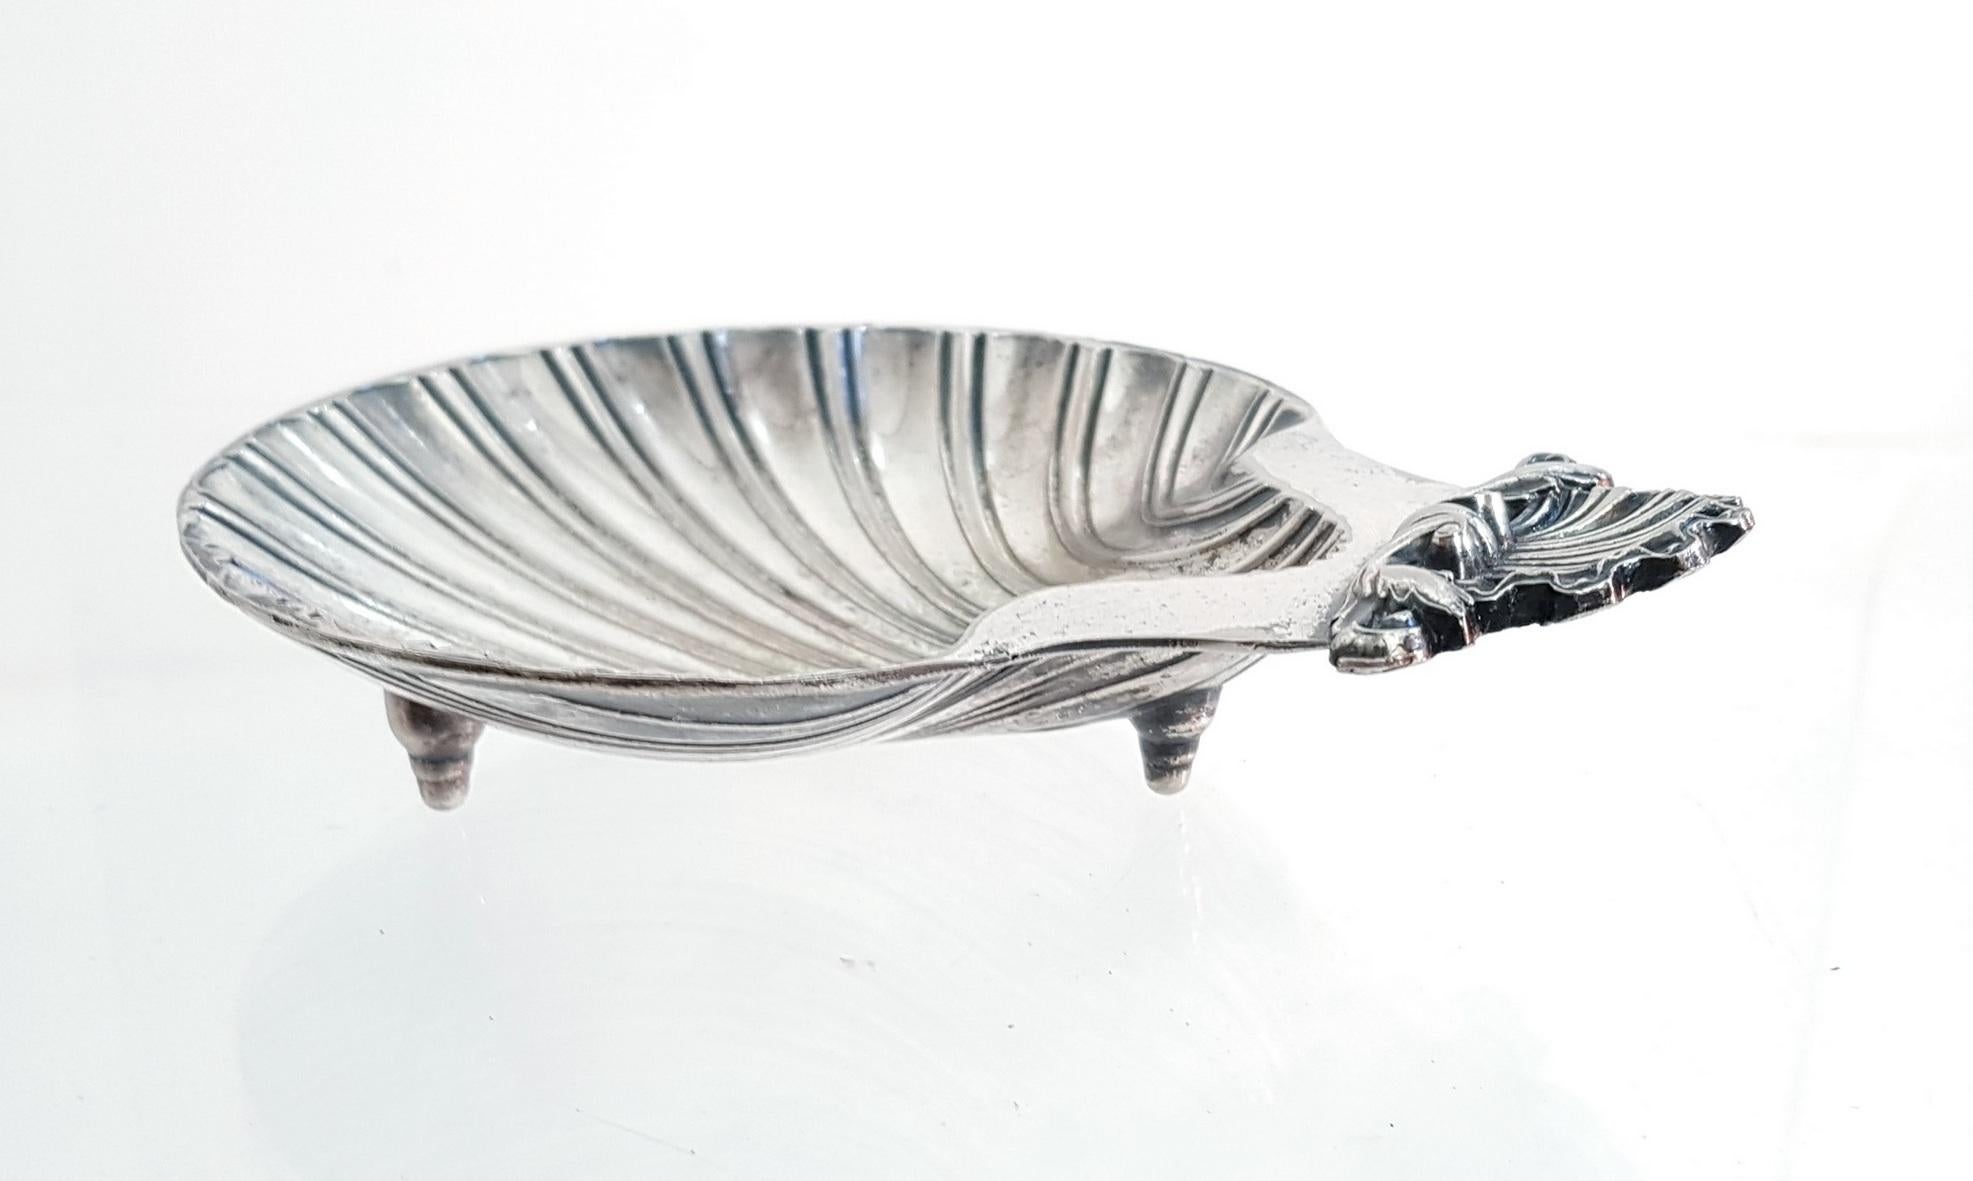 Cute footed clam dish in silver plate. Reproduction from an original design from the 18th century. This particular piece is made in the USA and has clear stamps underneath. This is perfect as a soap dish, ashtray or for snacks.